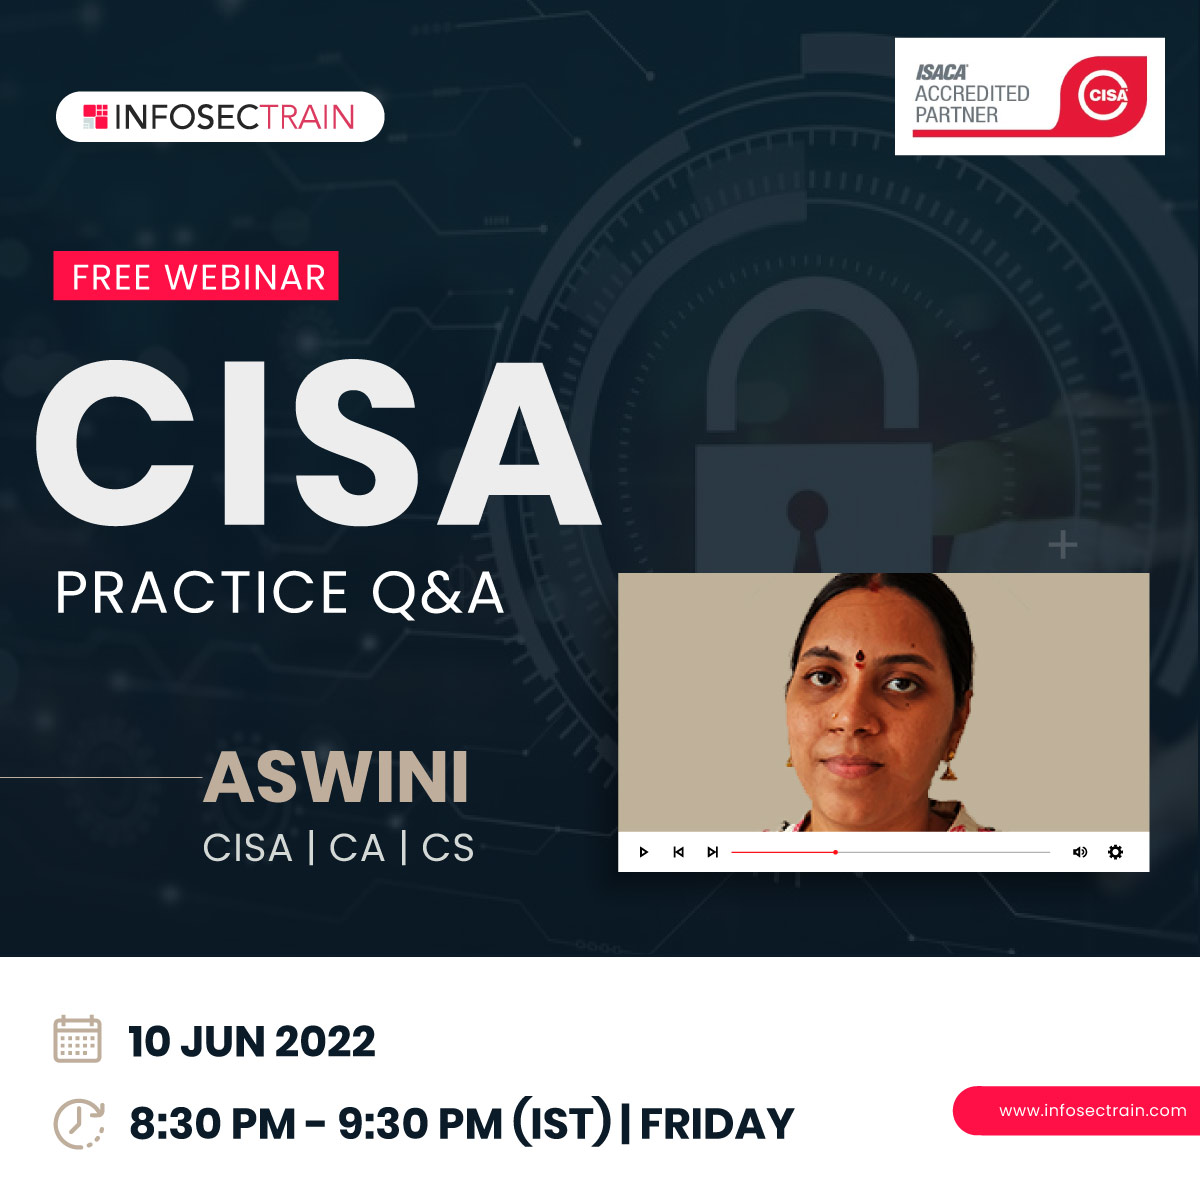 Free webinar on CISA Practice Q&A With Aswini, Online Event